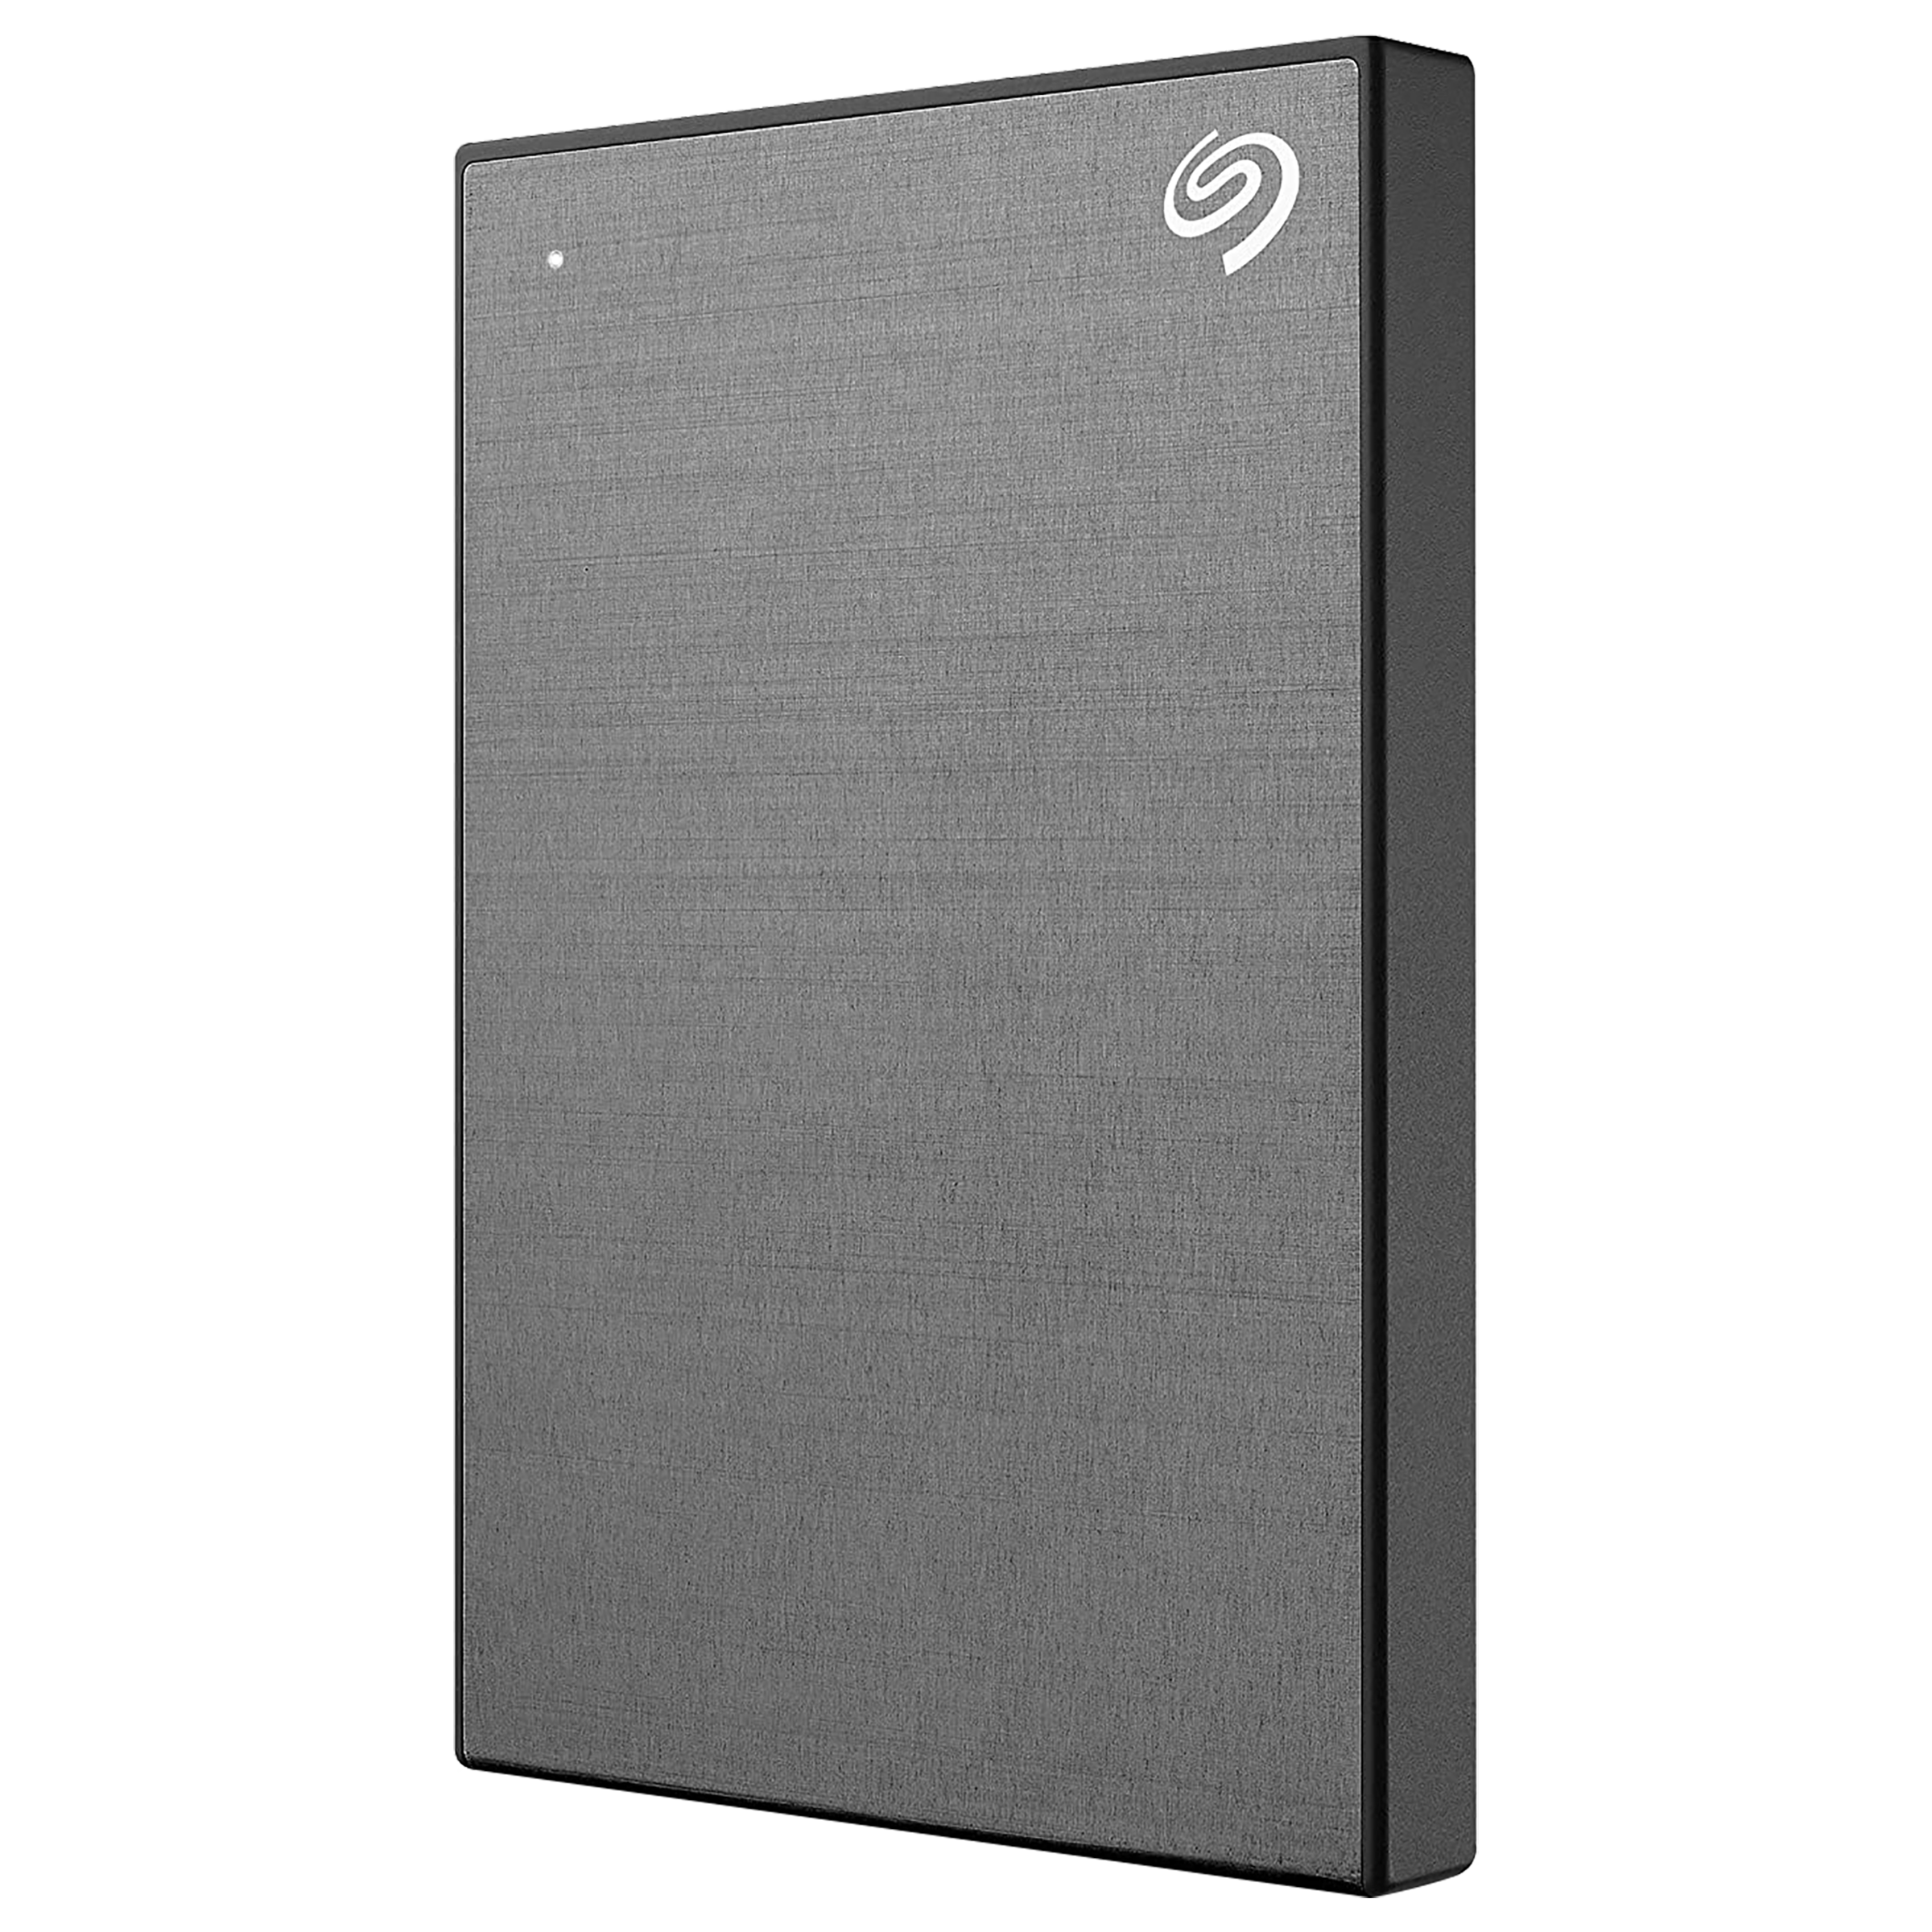 Seagate - Seagate One Touch 1TB USB 3.0 Hard Disk Drive (Password Activated Hardware Encryption, STKY1000404, Grey)